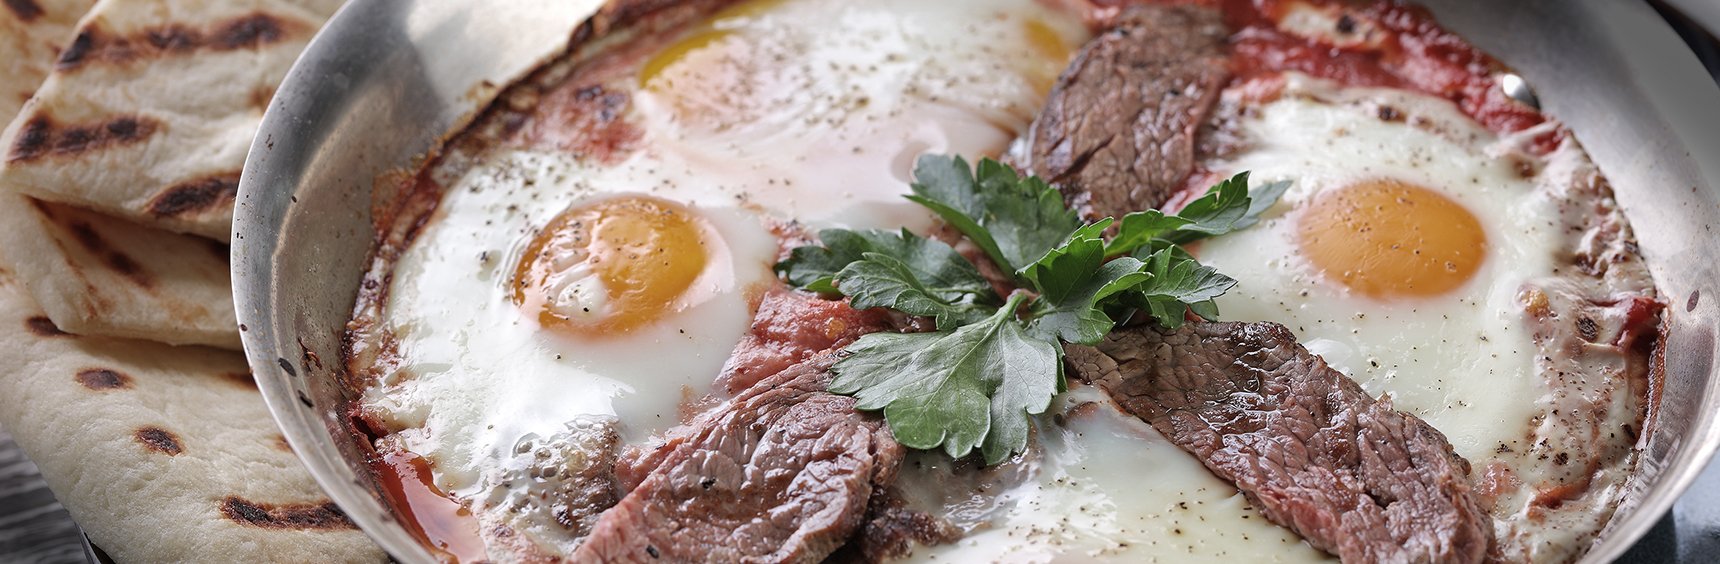 Beef and eggs in a pan